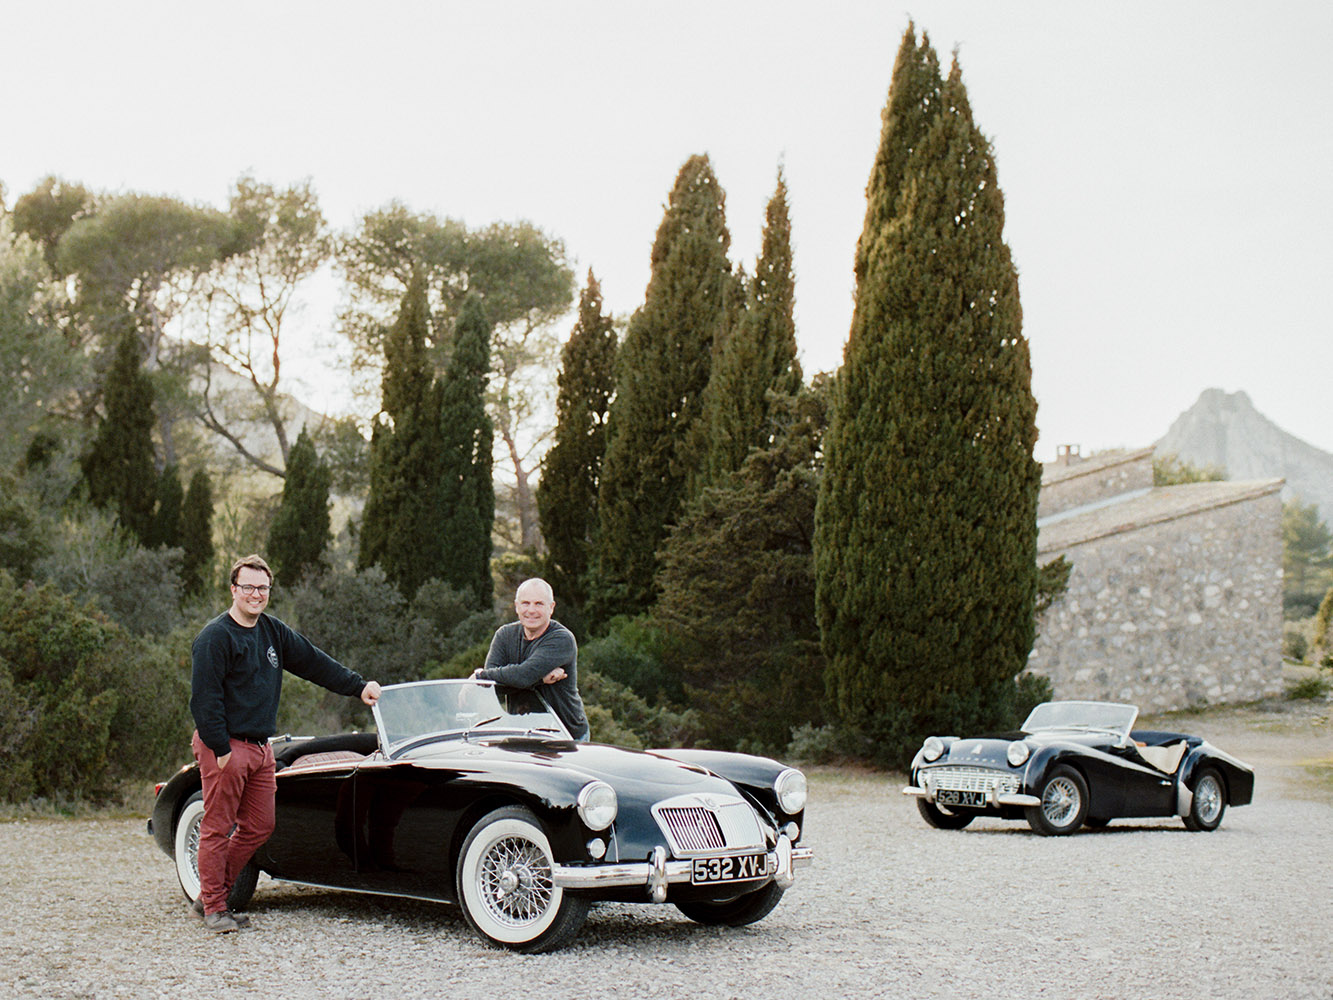 A photo of one of the founders of Provence Classics, who offer Classic Car Rental in the south of France.